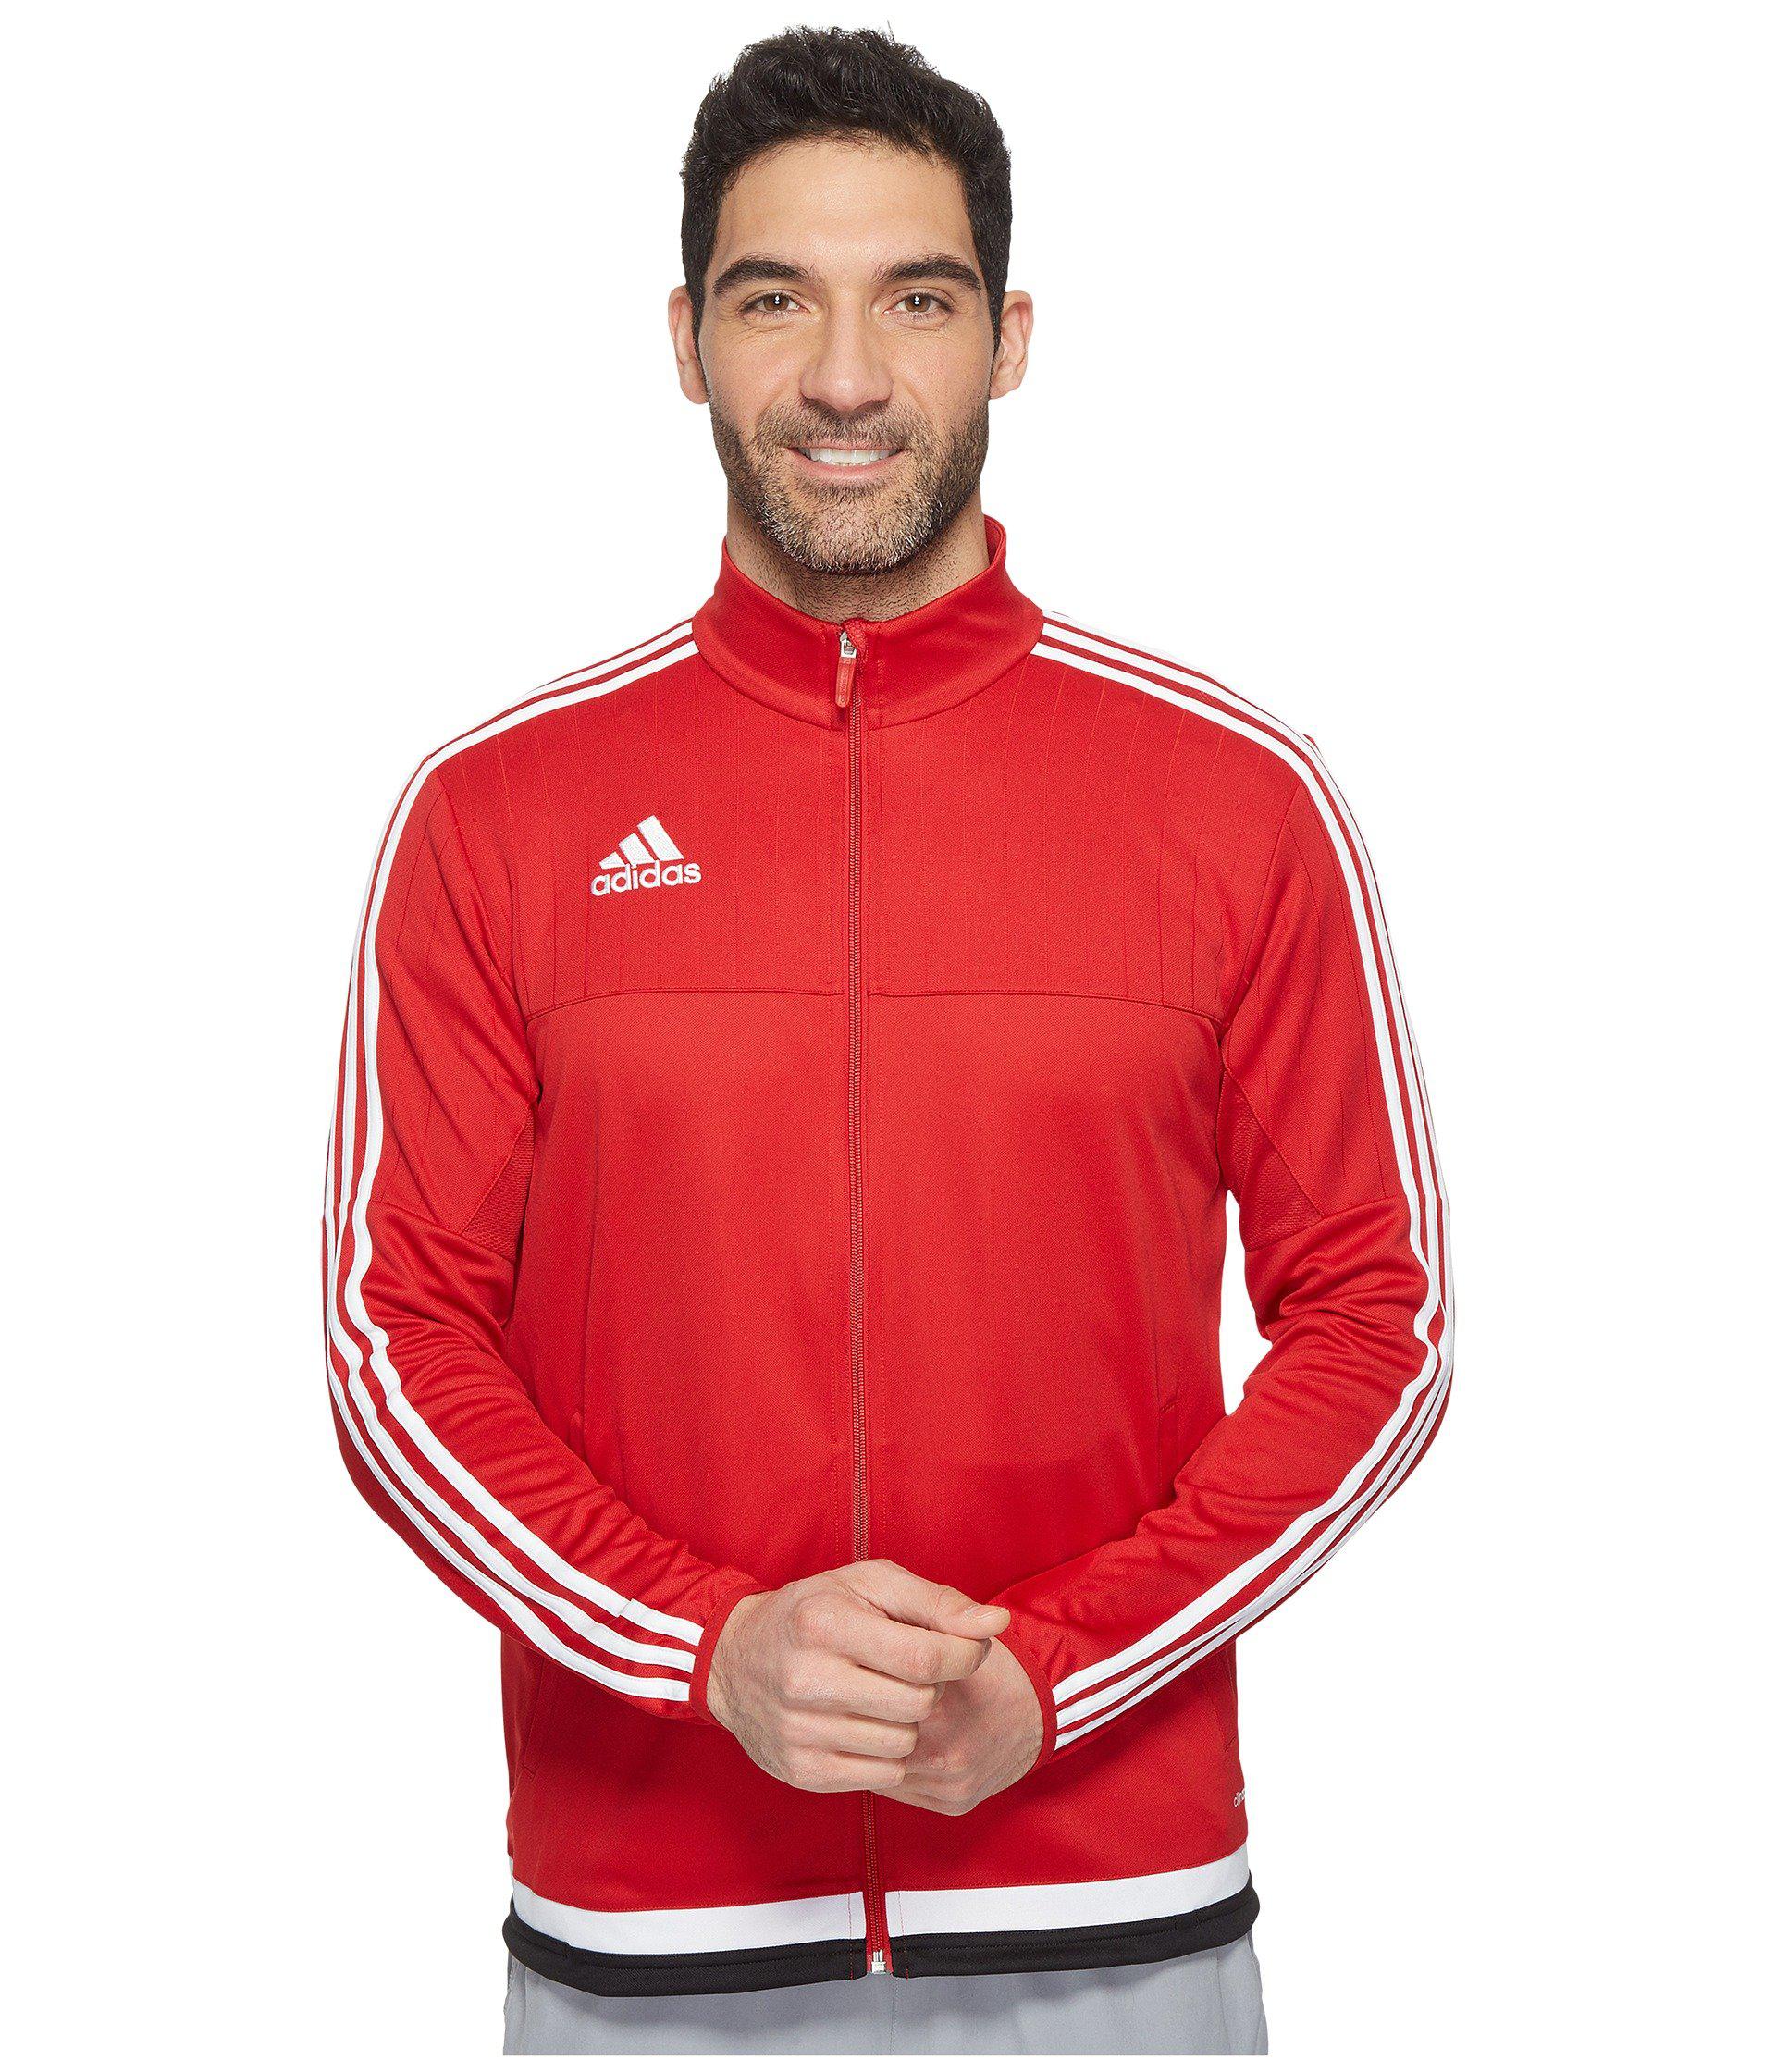 adidas Synthetic Tiro 15 Training Jacket in Red for Men - Lyst